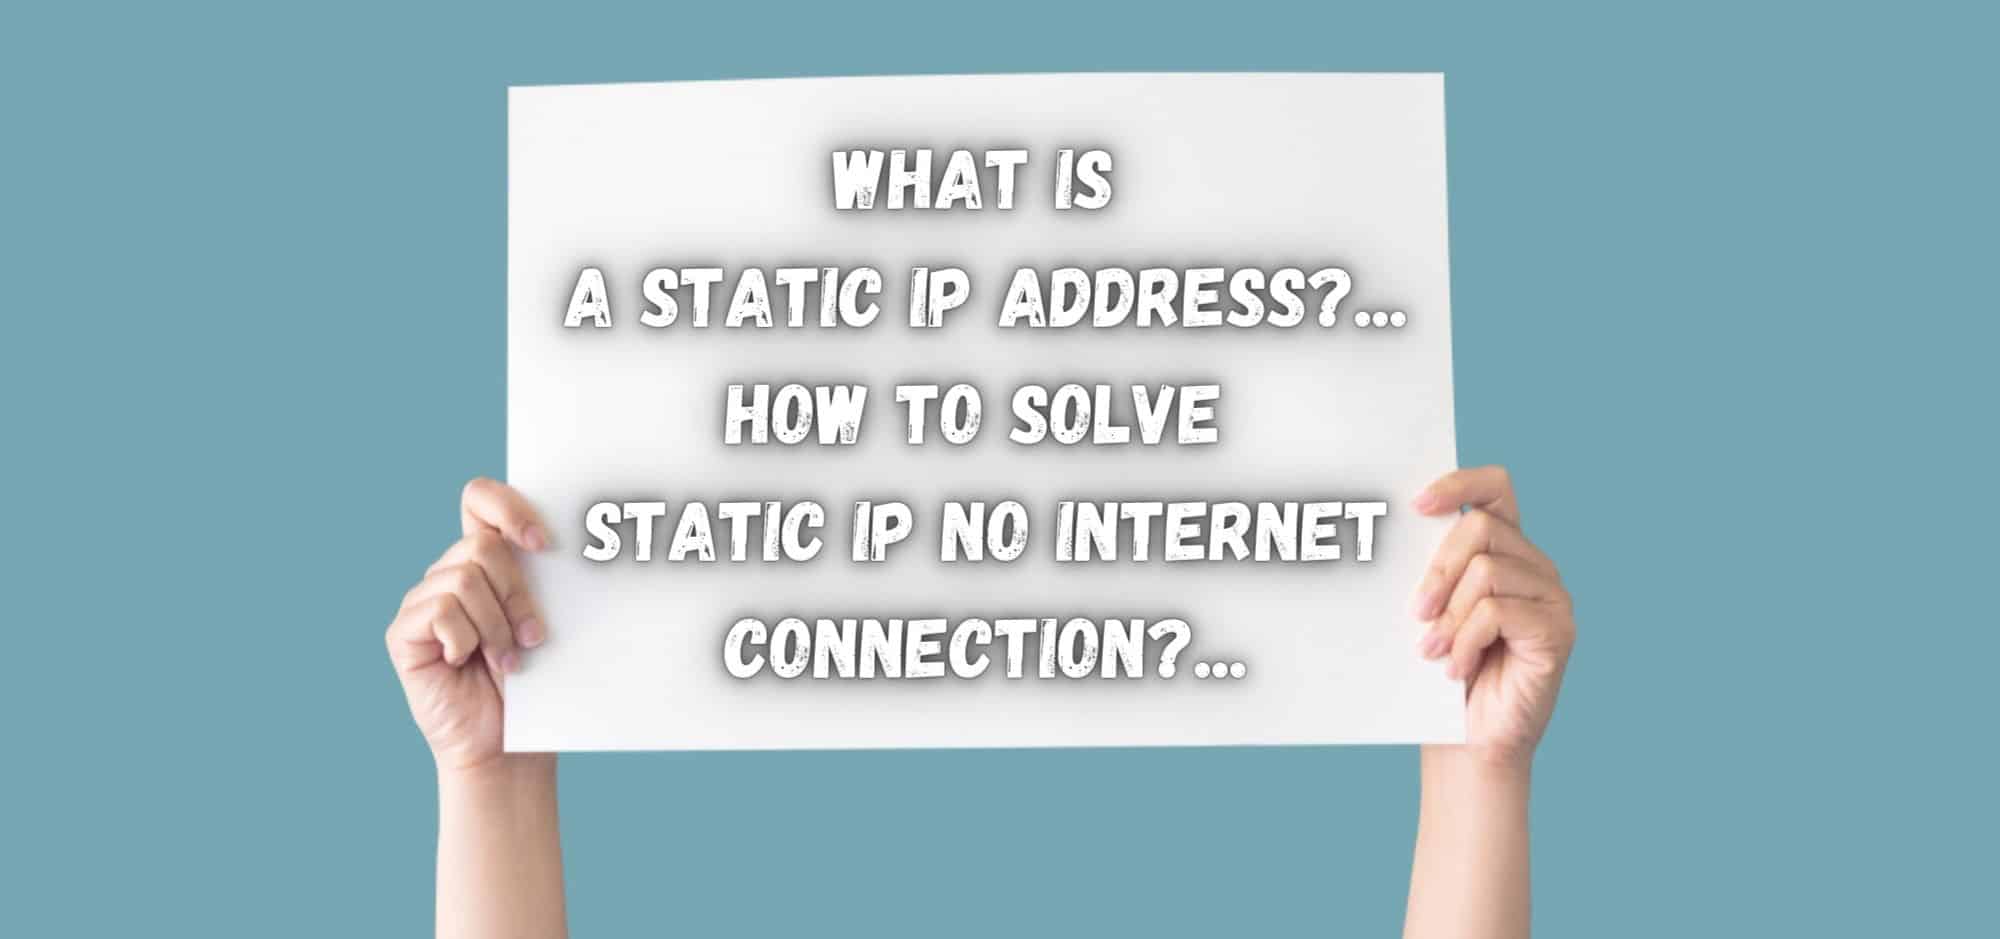 What Is A Static IP Address How To Solve Static IP No Internet Connection